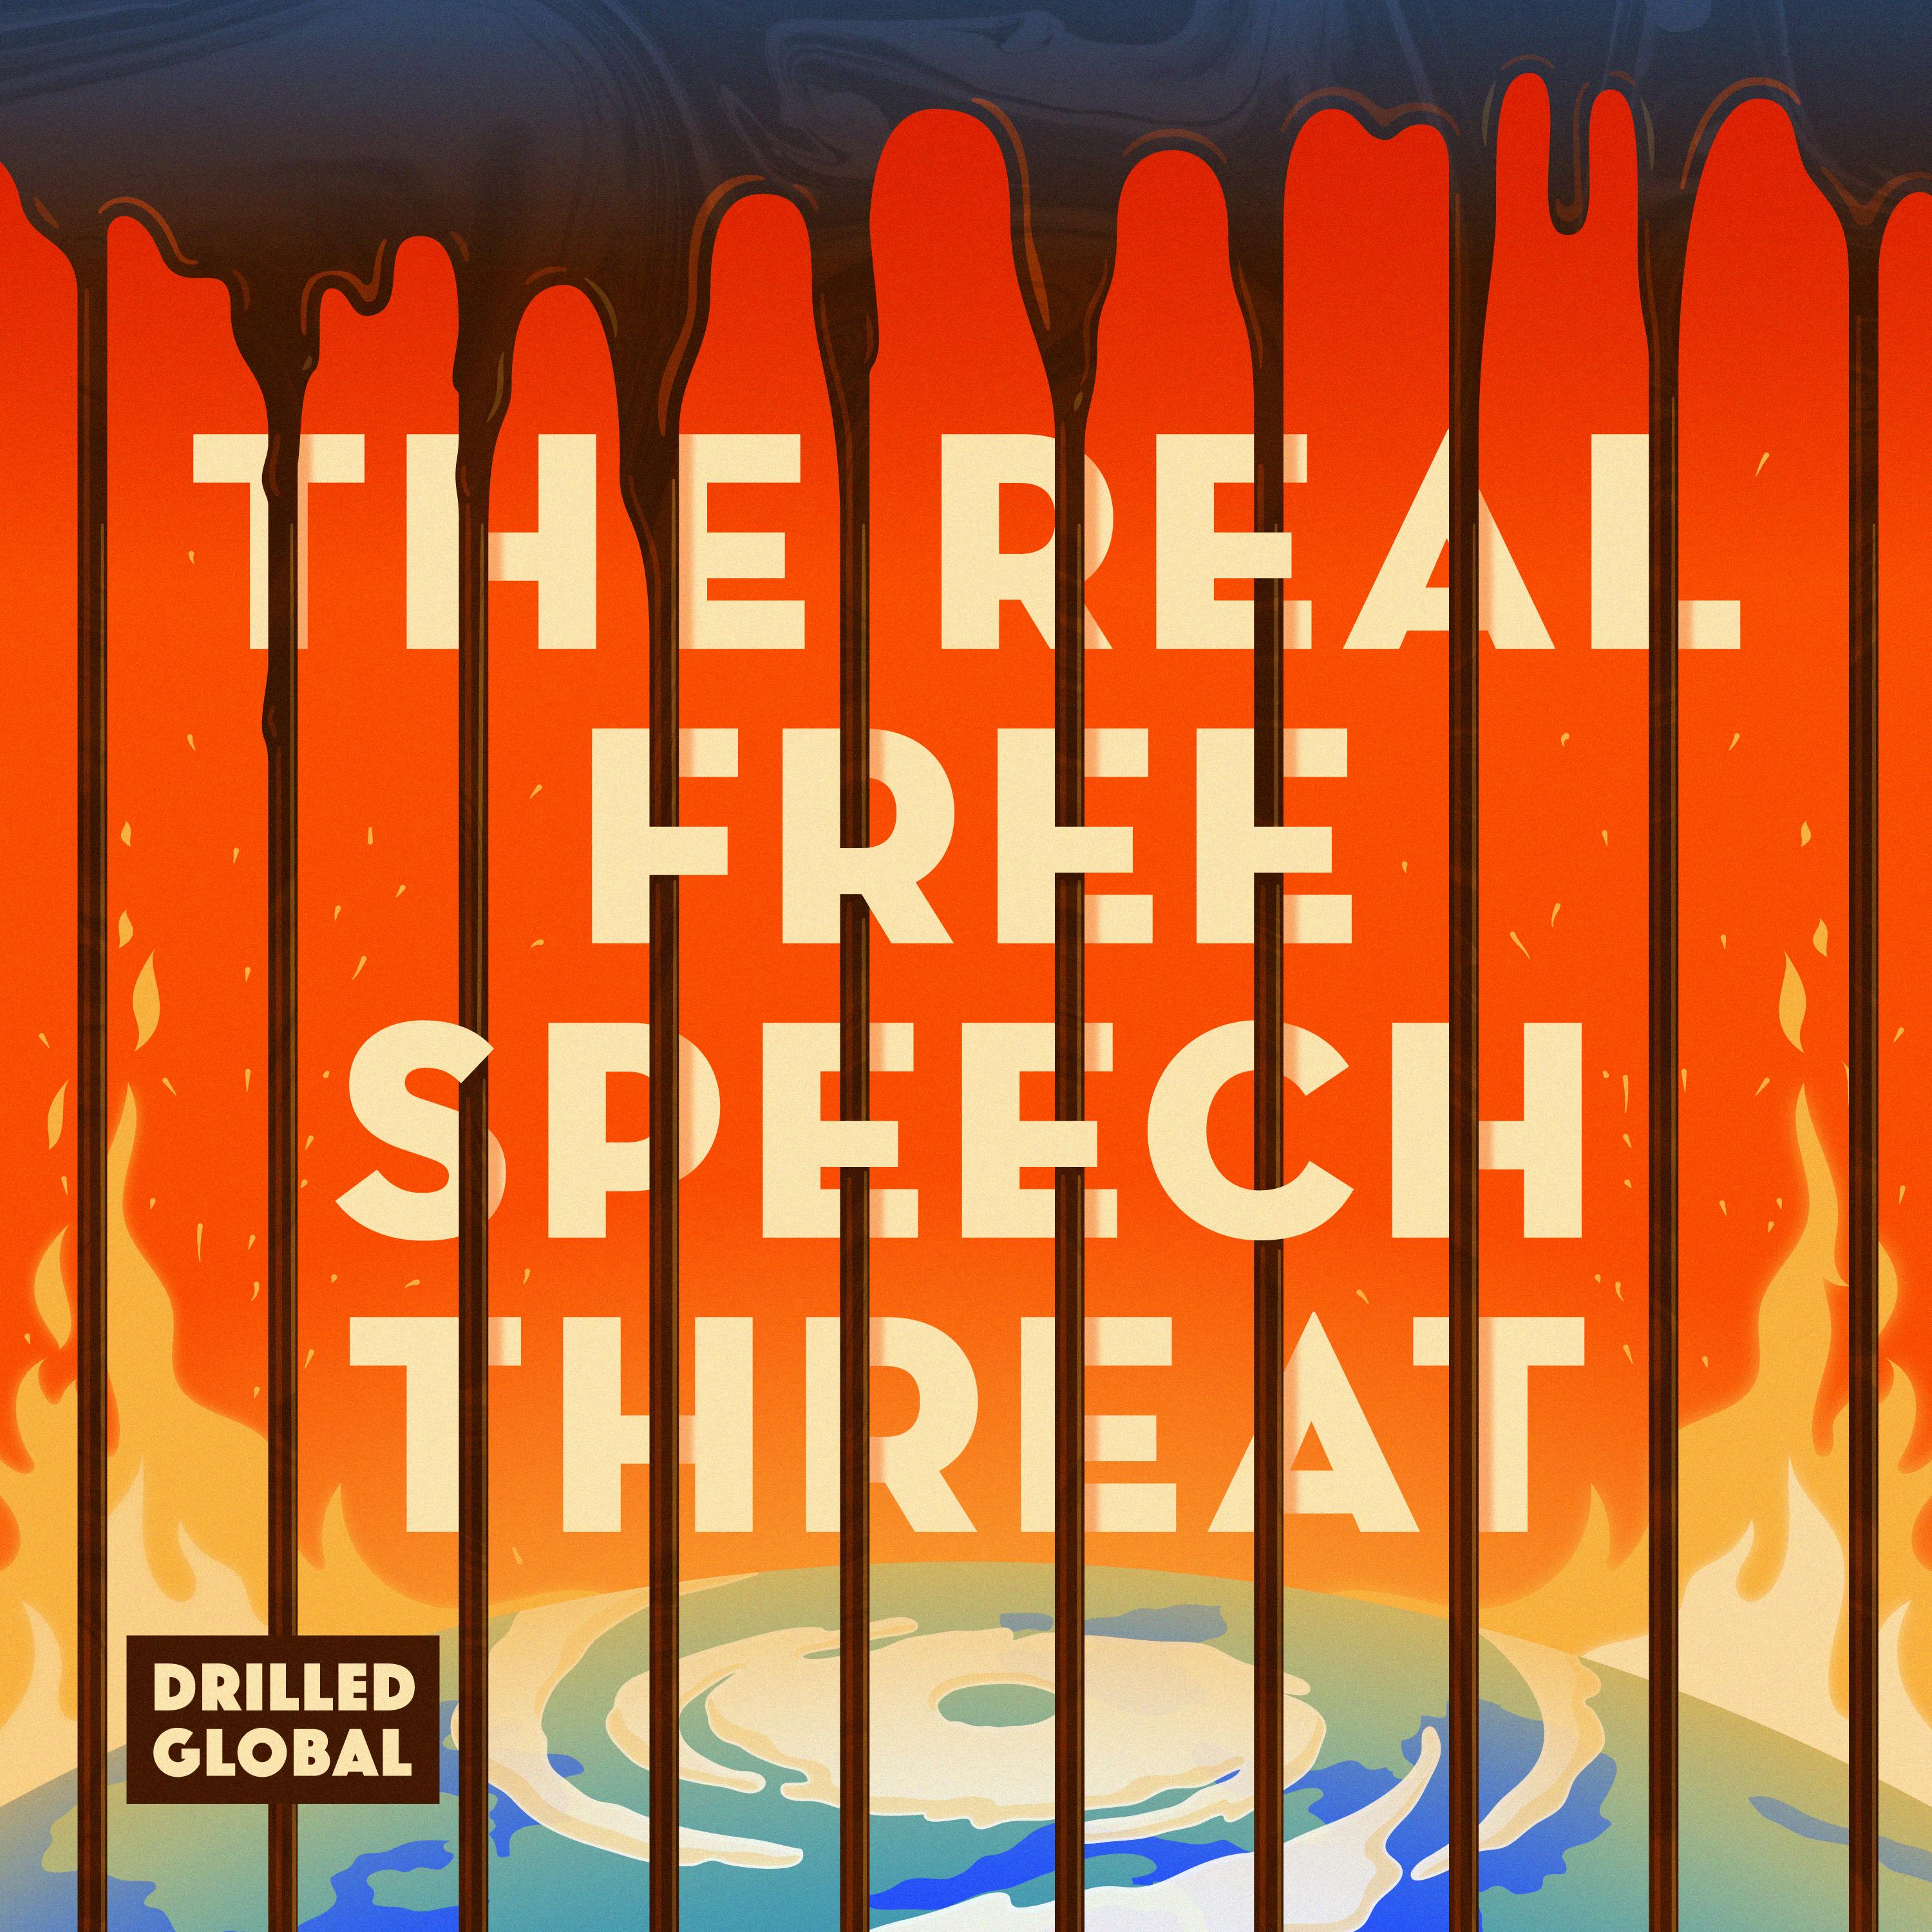 The Real Free Speech Threat: The Corporate Push to Criminalize Speech